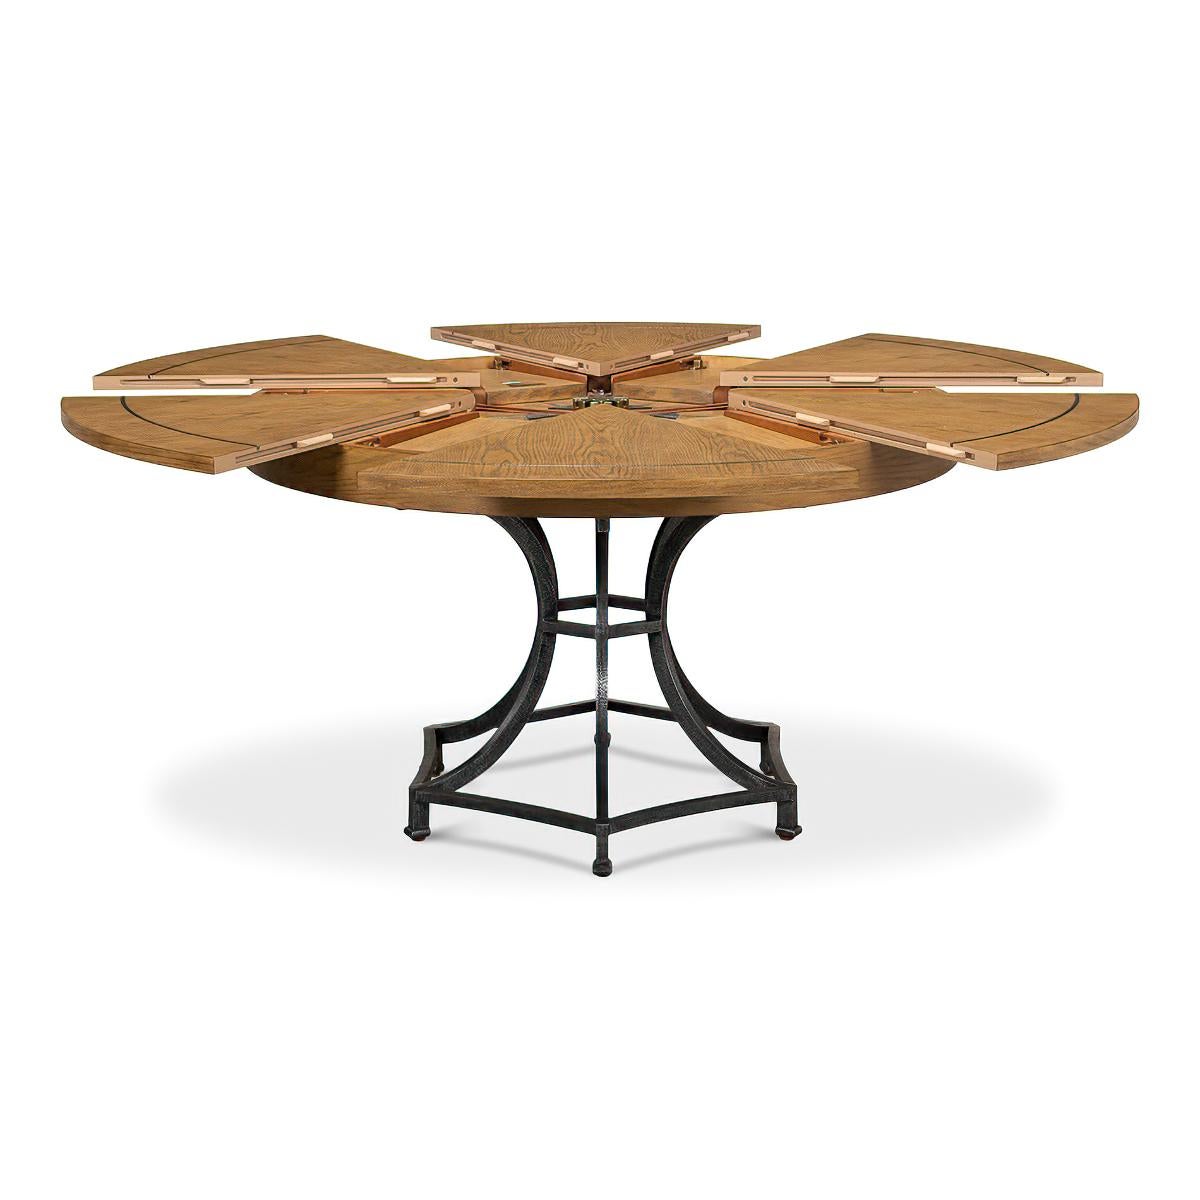 Asian Modern Industrial Round Dining Table - Warm Oak For Sale